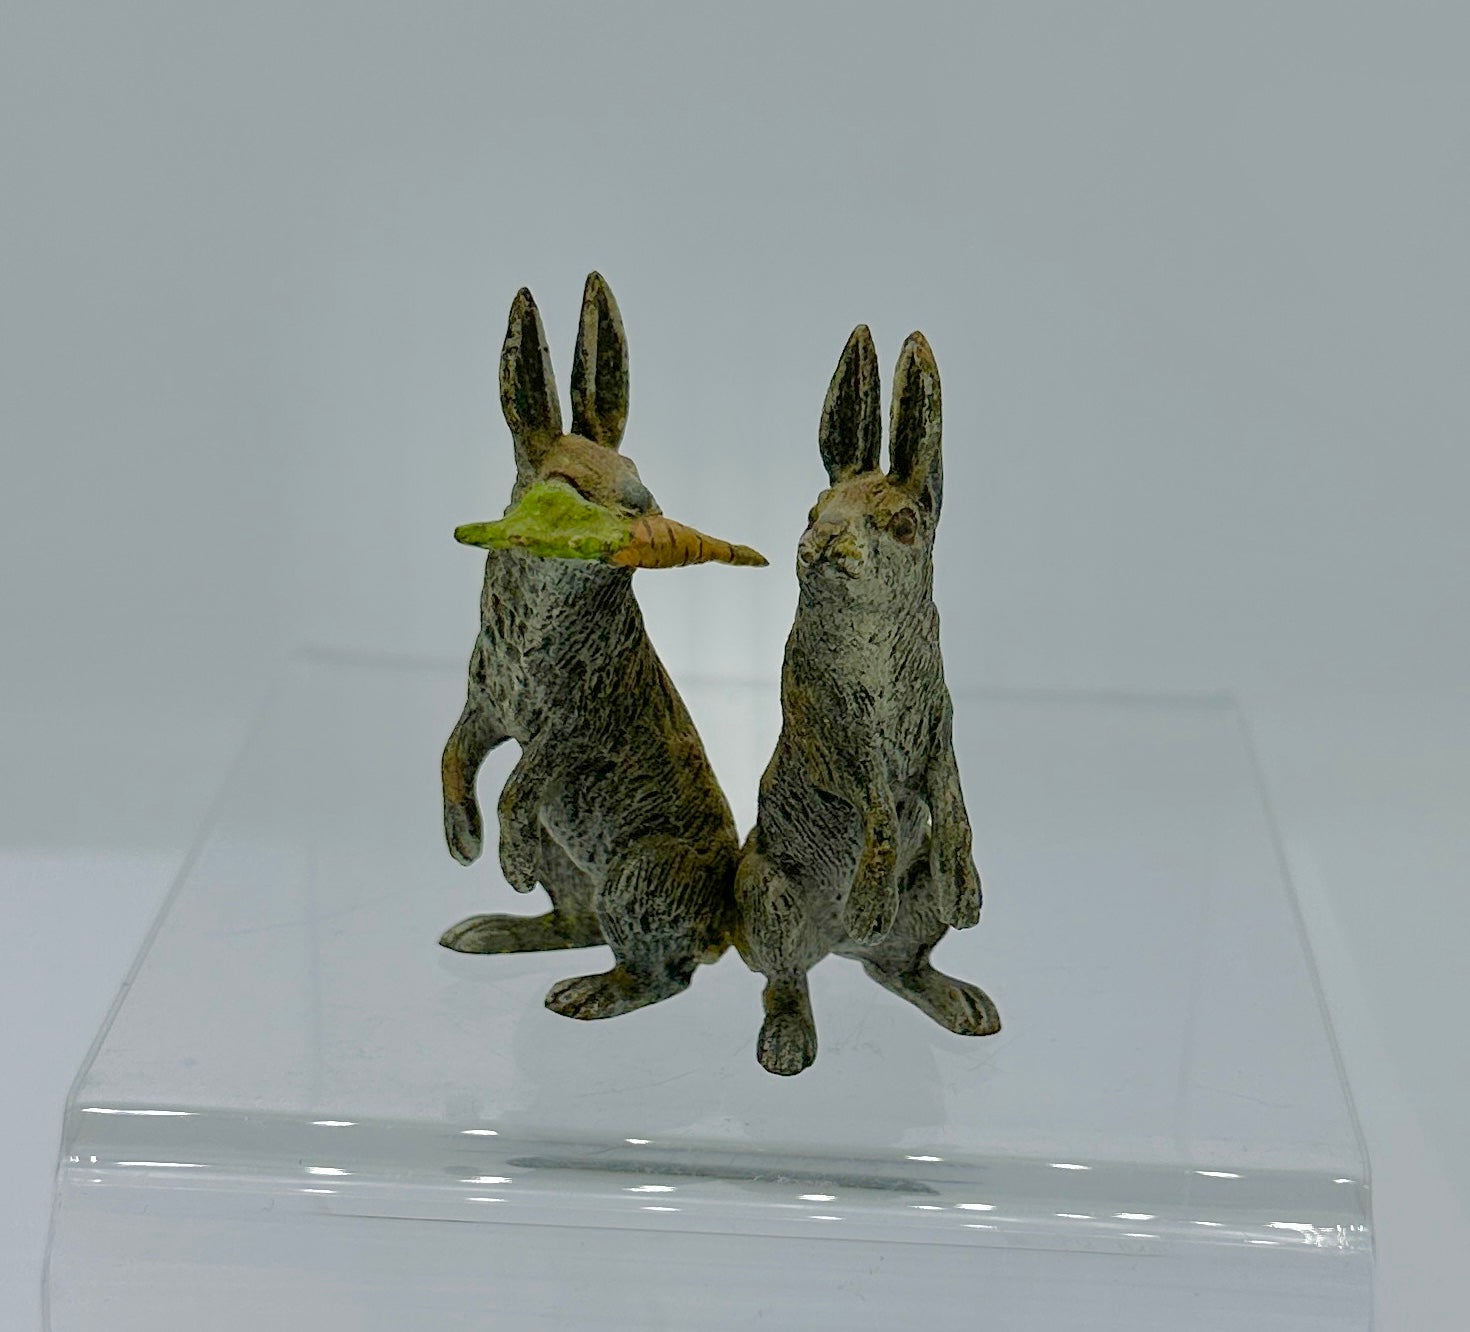 THIS IS A SUPERB ANTIQUE AUSTRIAN VIENNA BRONZE OF TWO BUNNY RABBITS HOLDING A CARROT.
This wonderful antique Austrian Vienna Bronze (Bronze de Vienne, Wiener Bronze, Cold Painted Bronze) dates to circa 1900-1930.  The bronze is of the highest